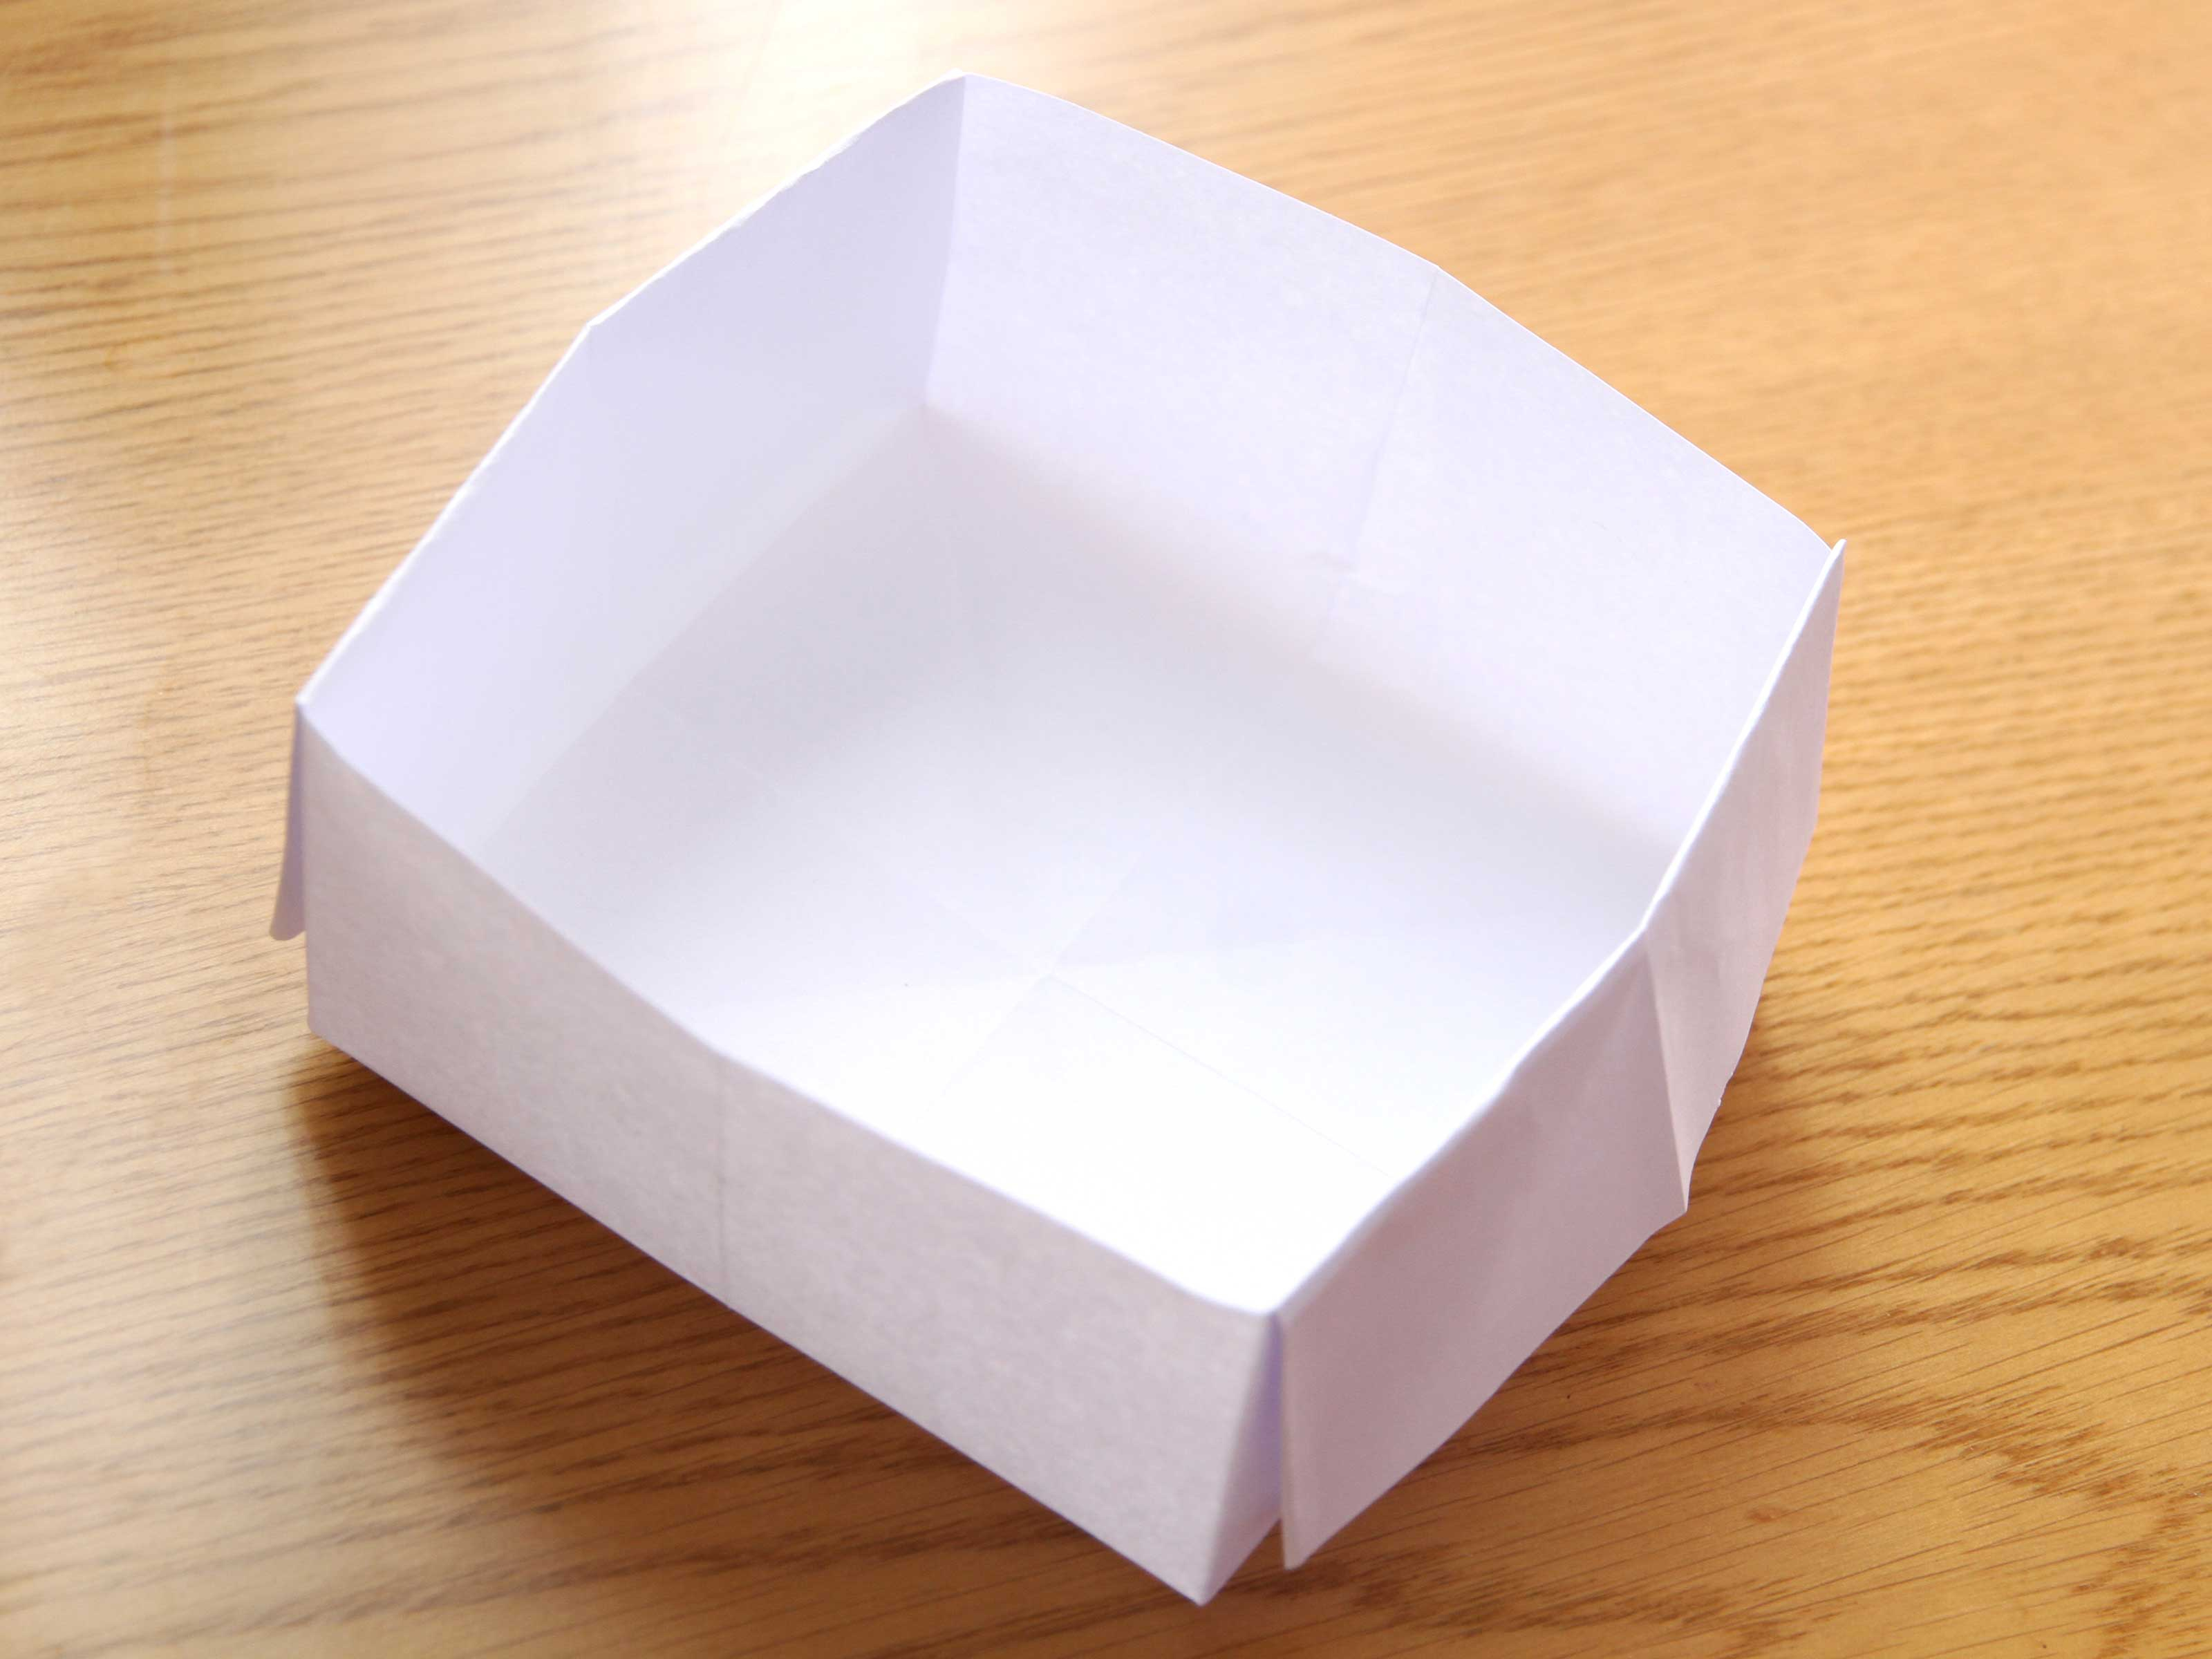 Simple Origami Bowl How To Make An Origami Box With Printer Paper 12 Steps